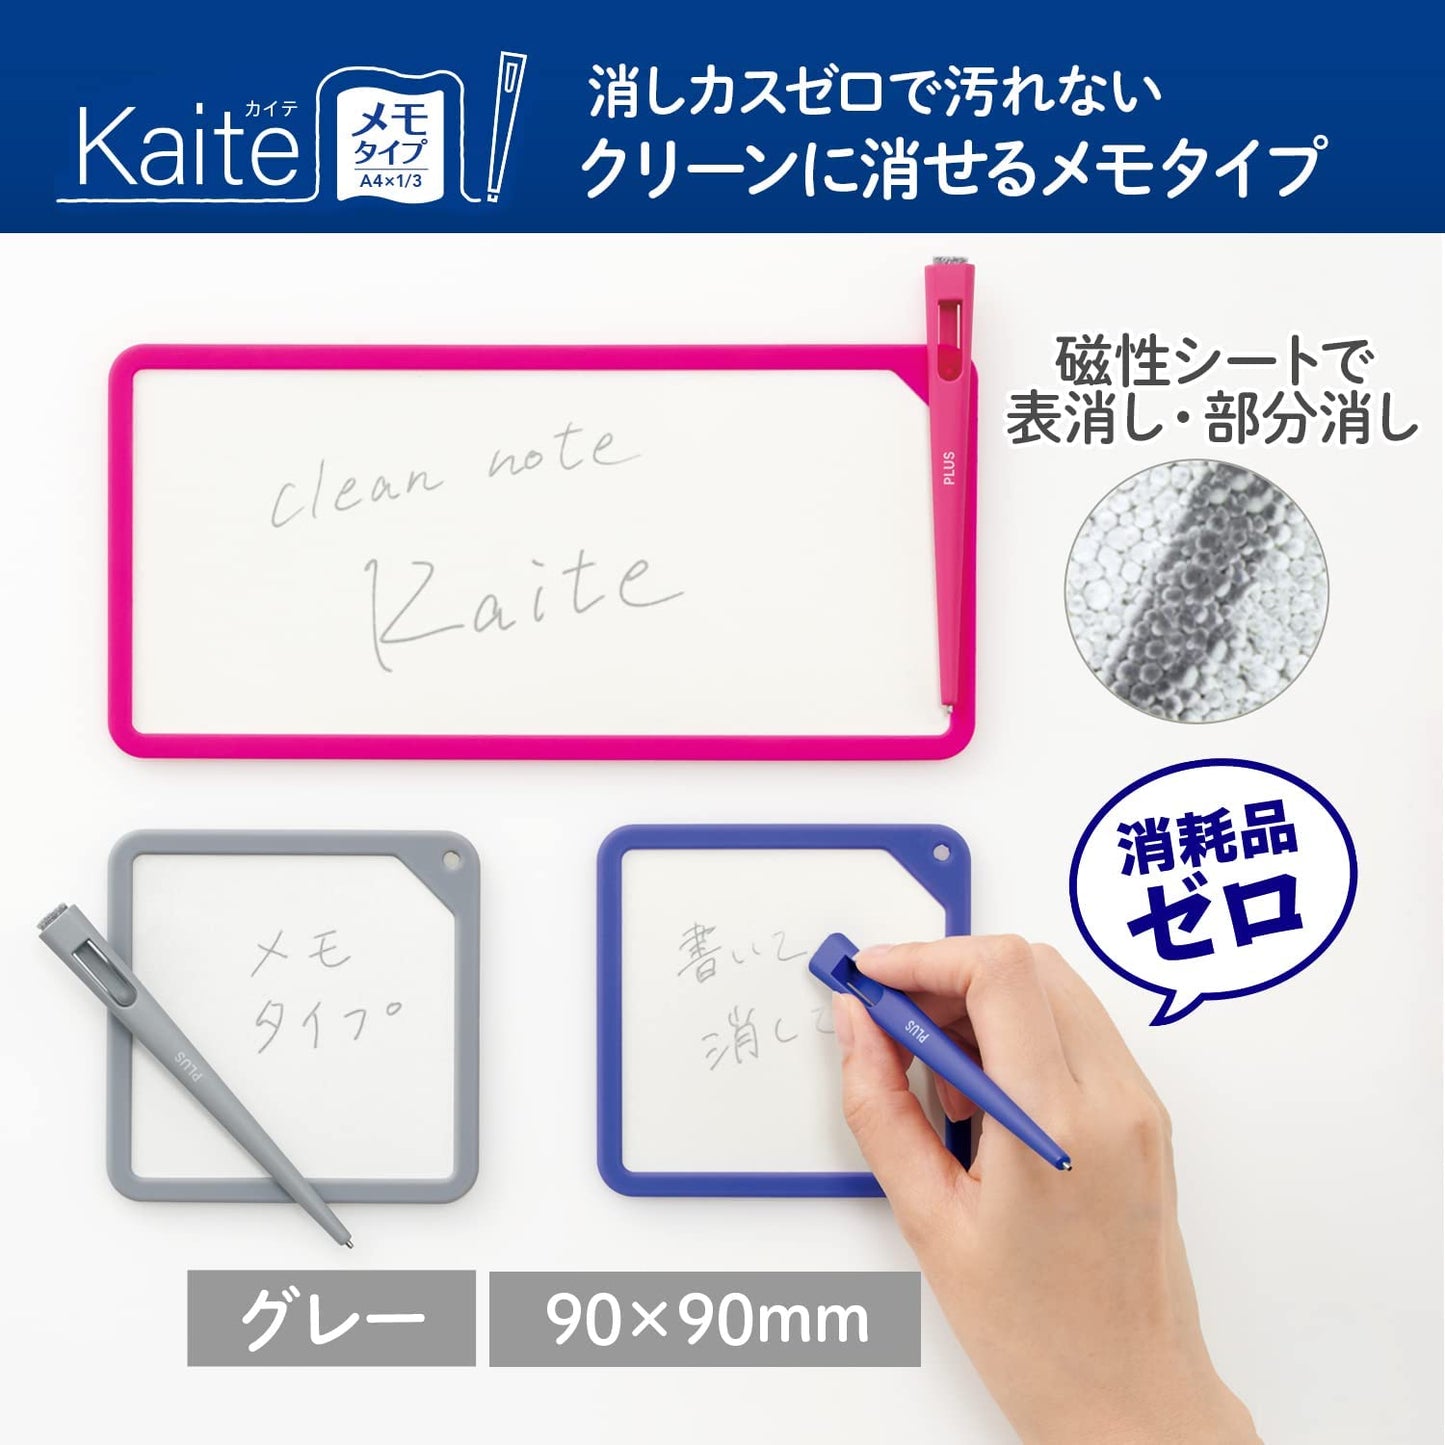 Kaite Note Taking Mini - Battery-Free and Cheap!